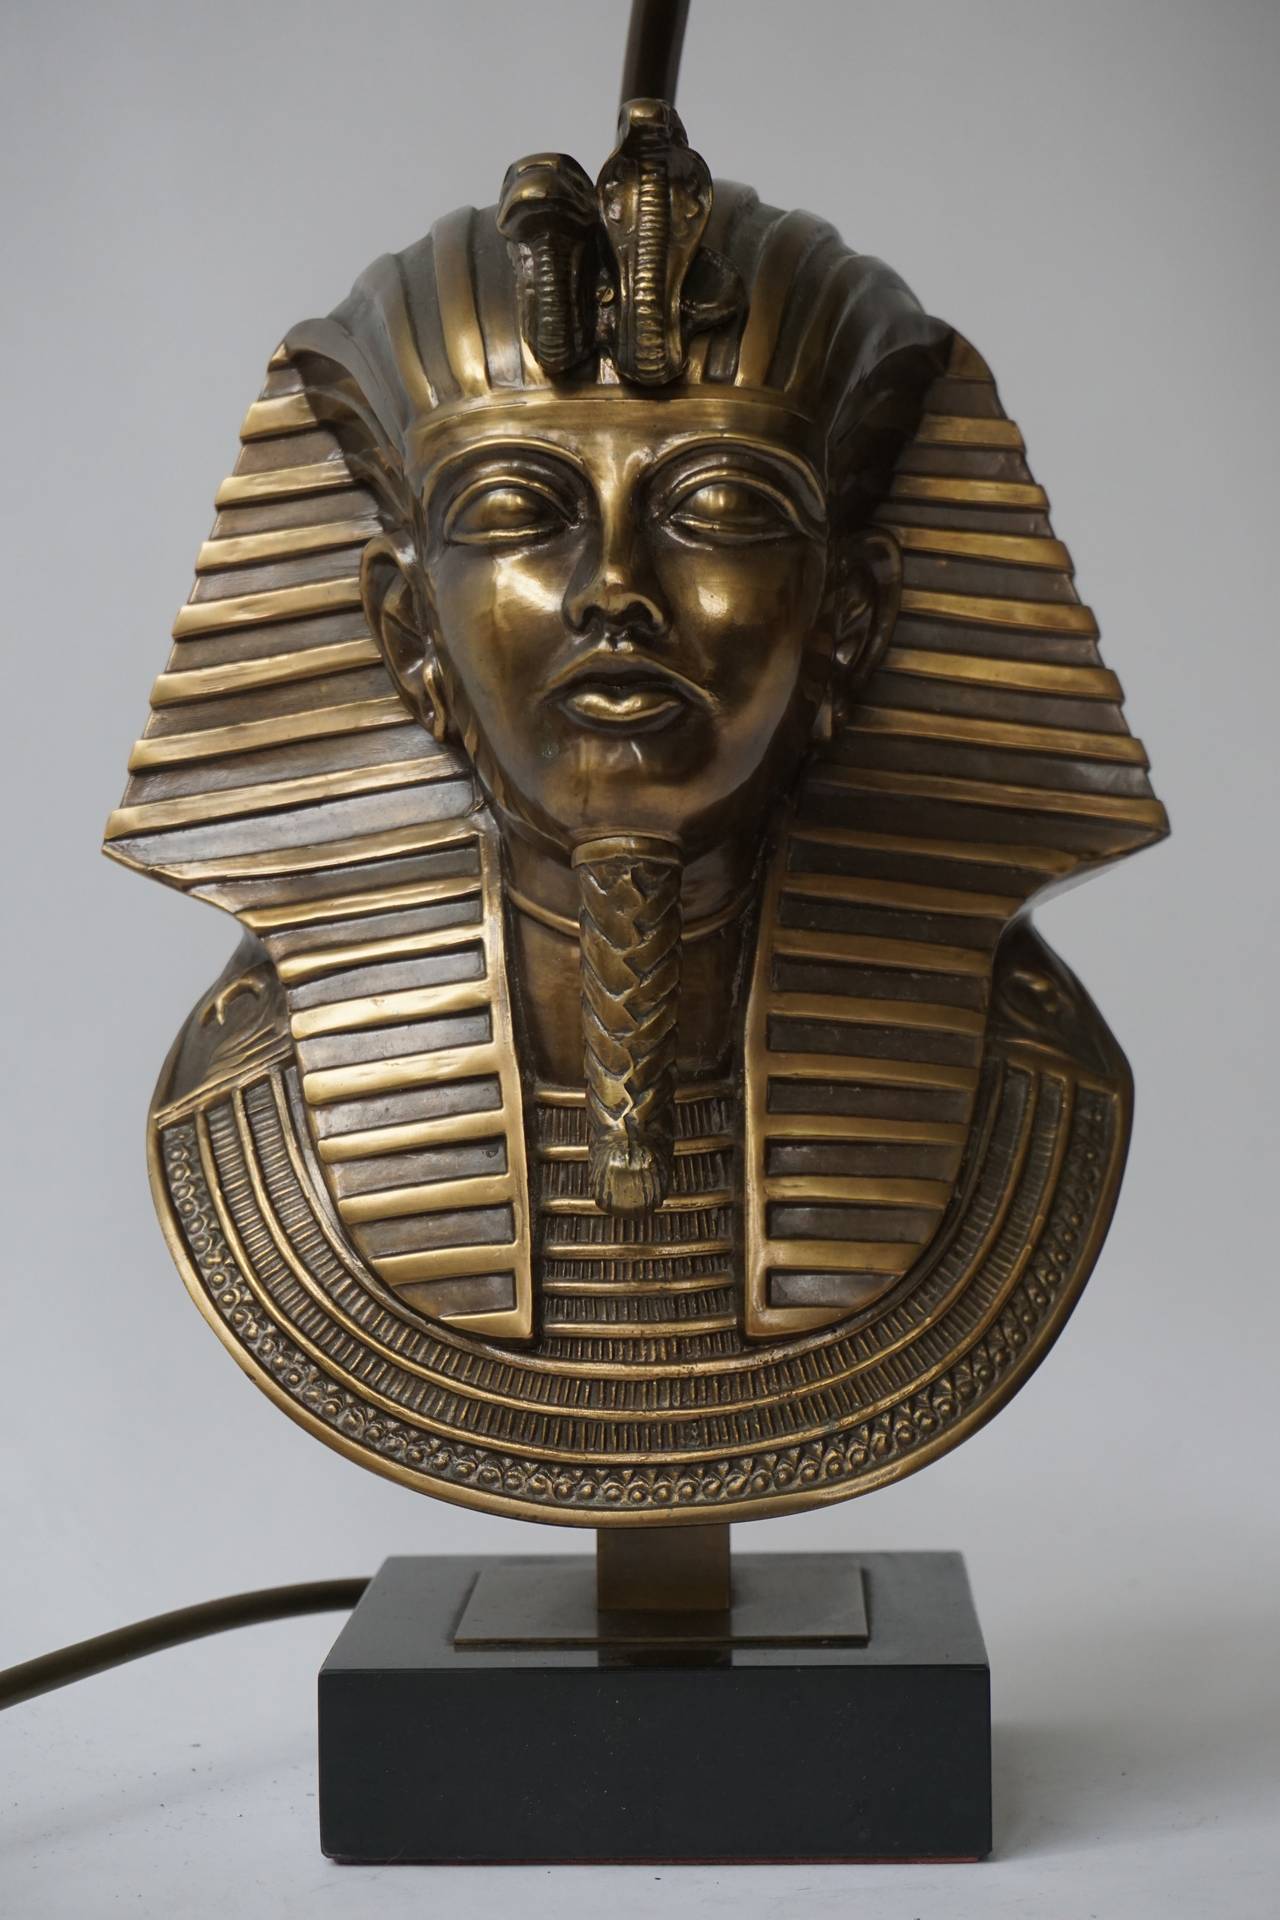 A Egyptian revival pharaoh head table lamp in brass/bronze 24-karat gold-plated on black marble base.
Price without shade.